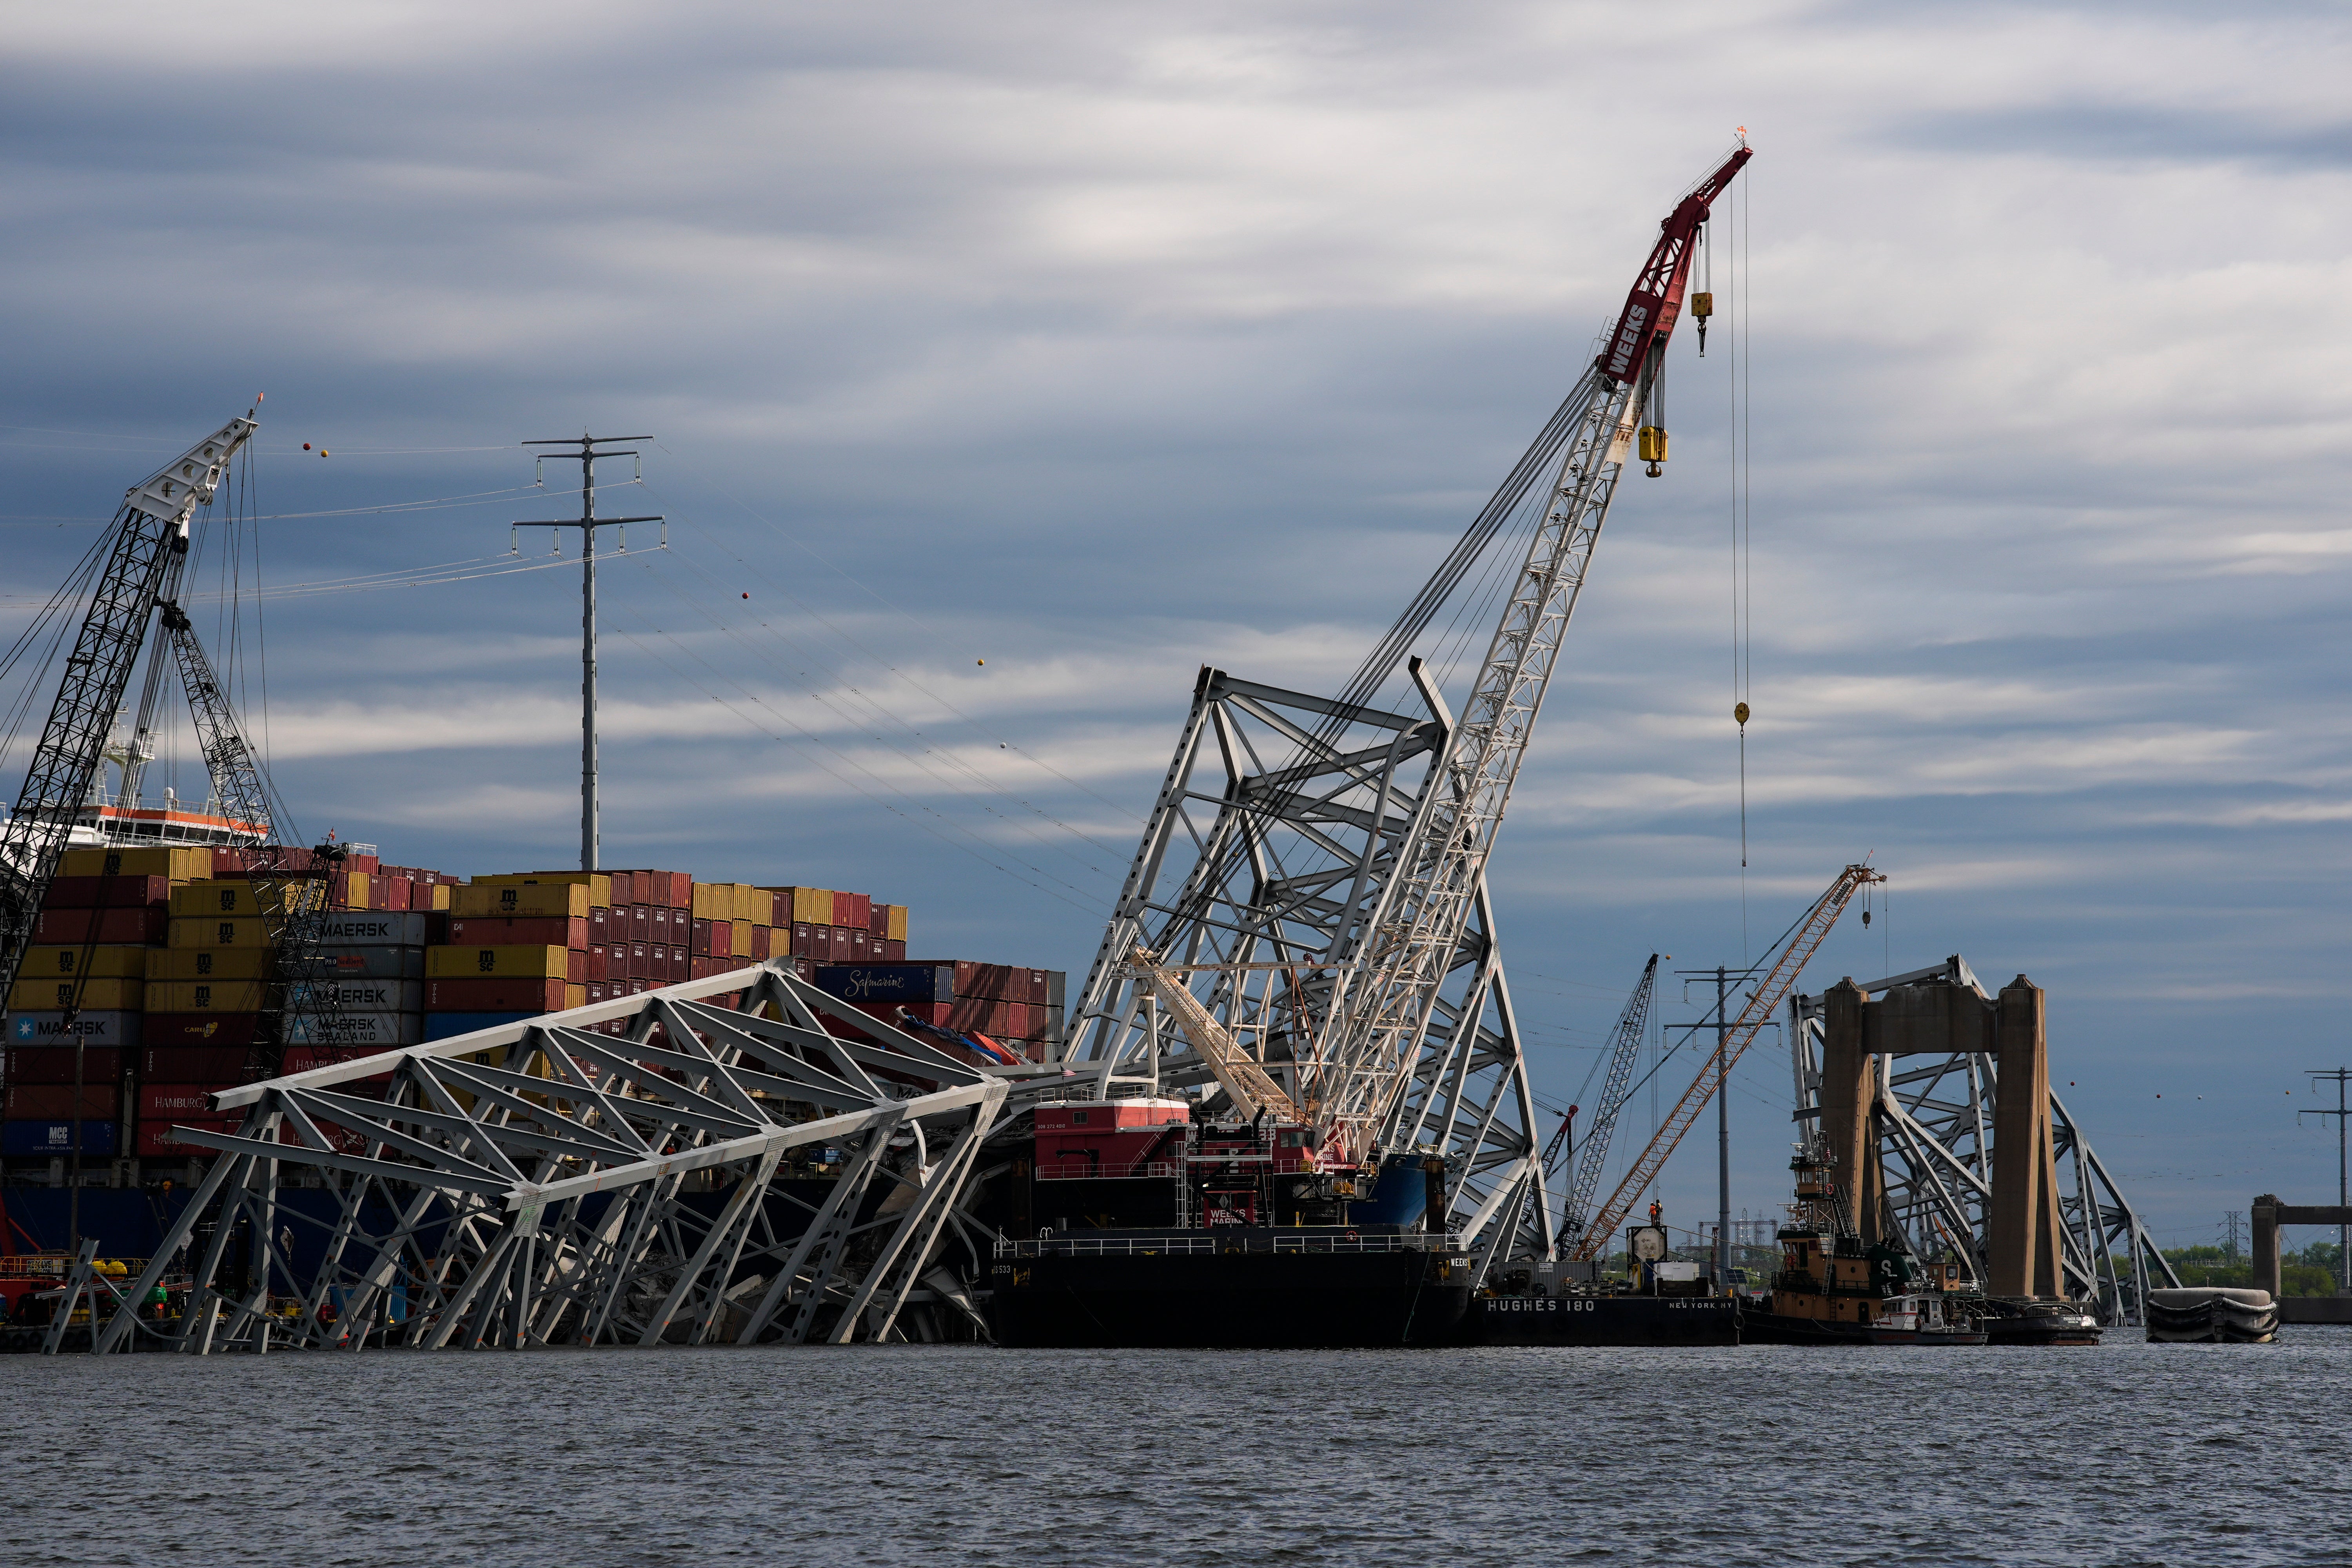 The collapsed Francis Scott Key Bridge lays on top of the container ship Dali